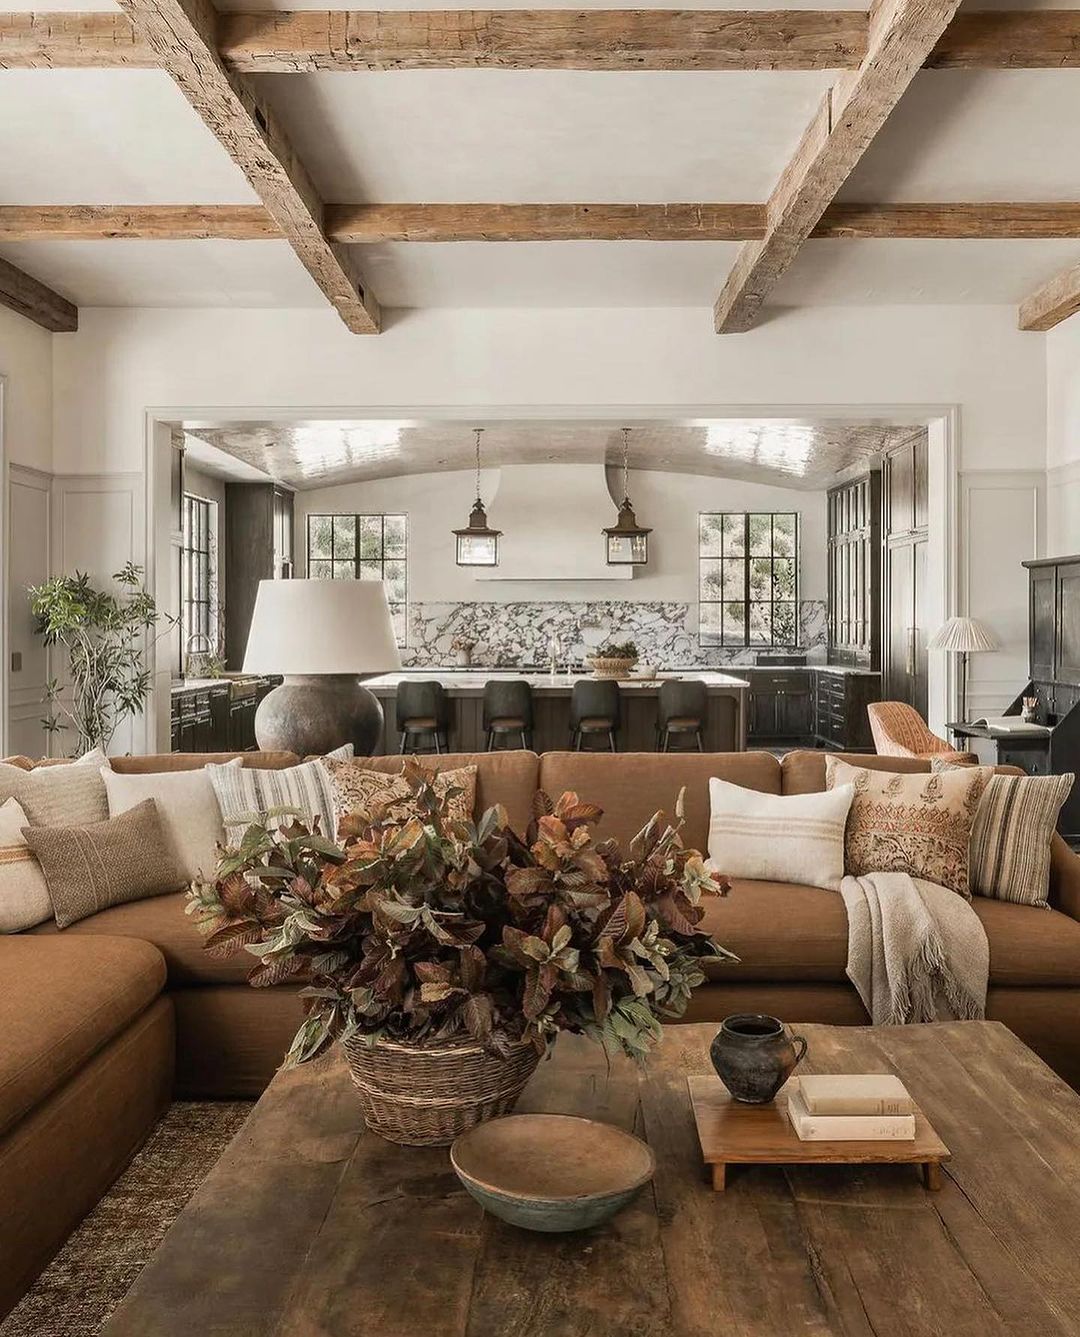 Timeless Texture with Reclaimed Wood Decorative Beams